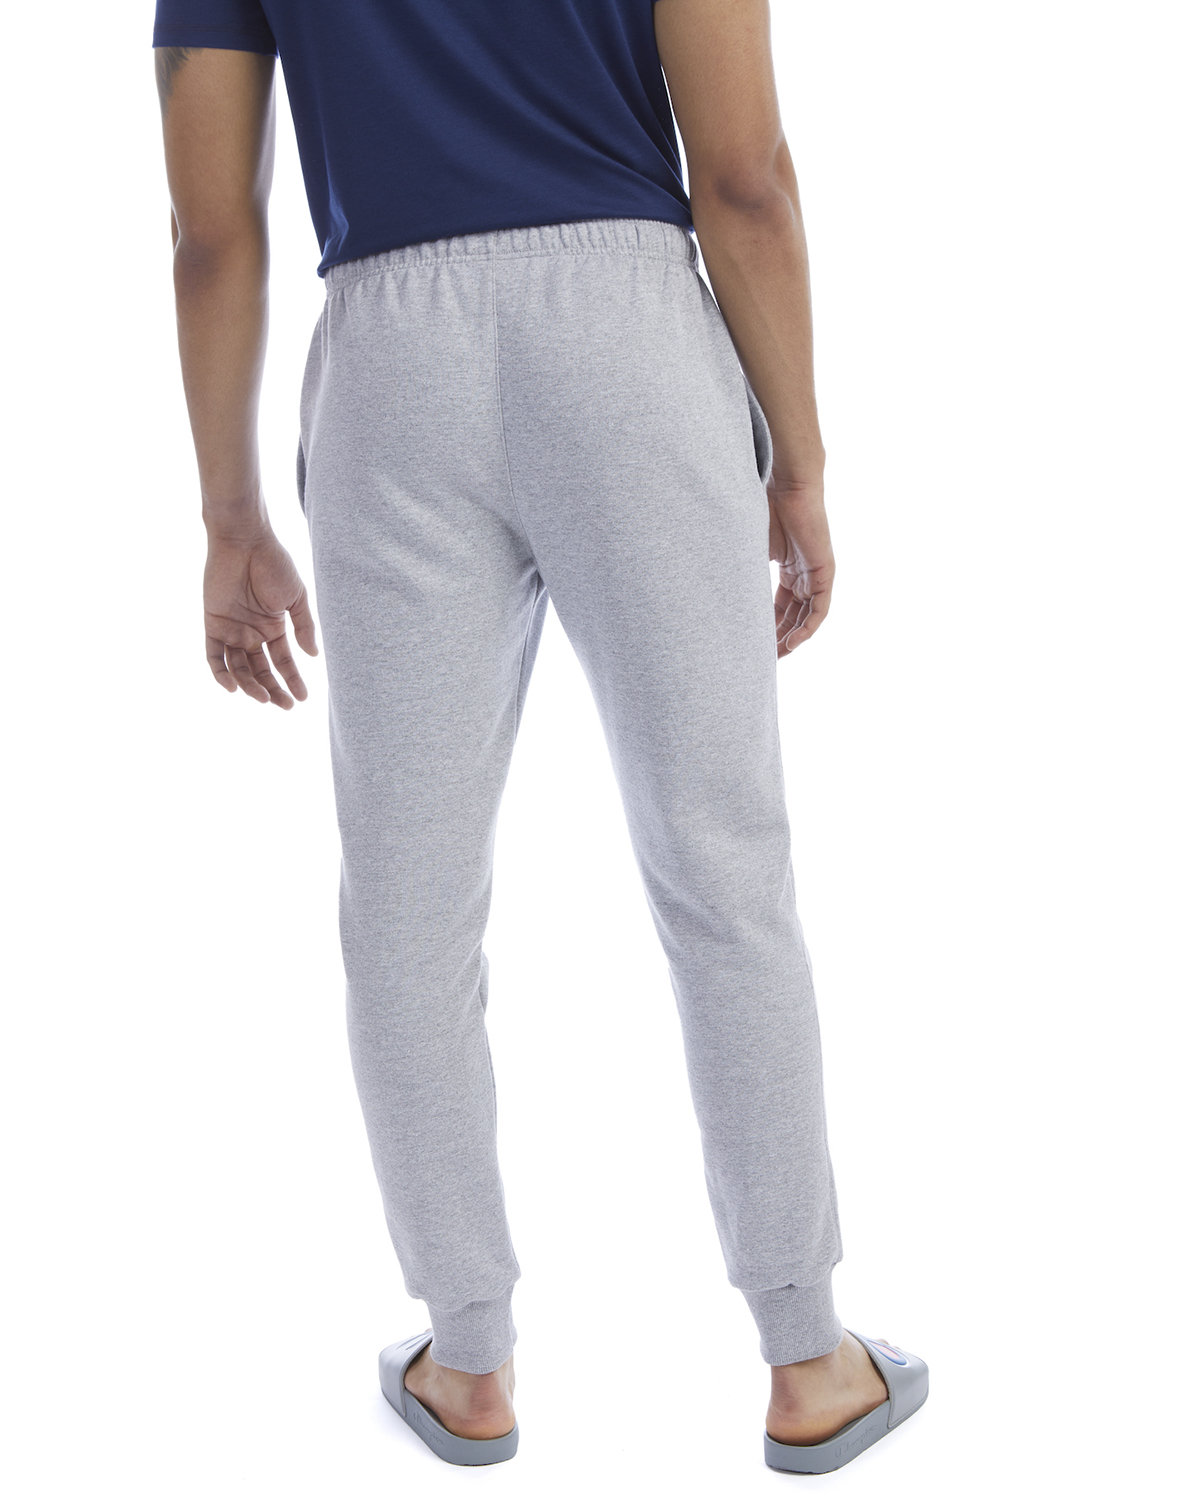 Champion Powerblend Sweatpant, Shop Now at Pseudio!